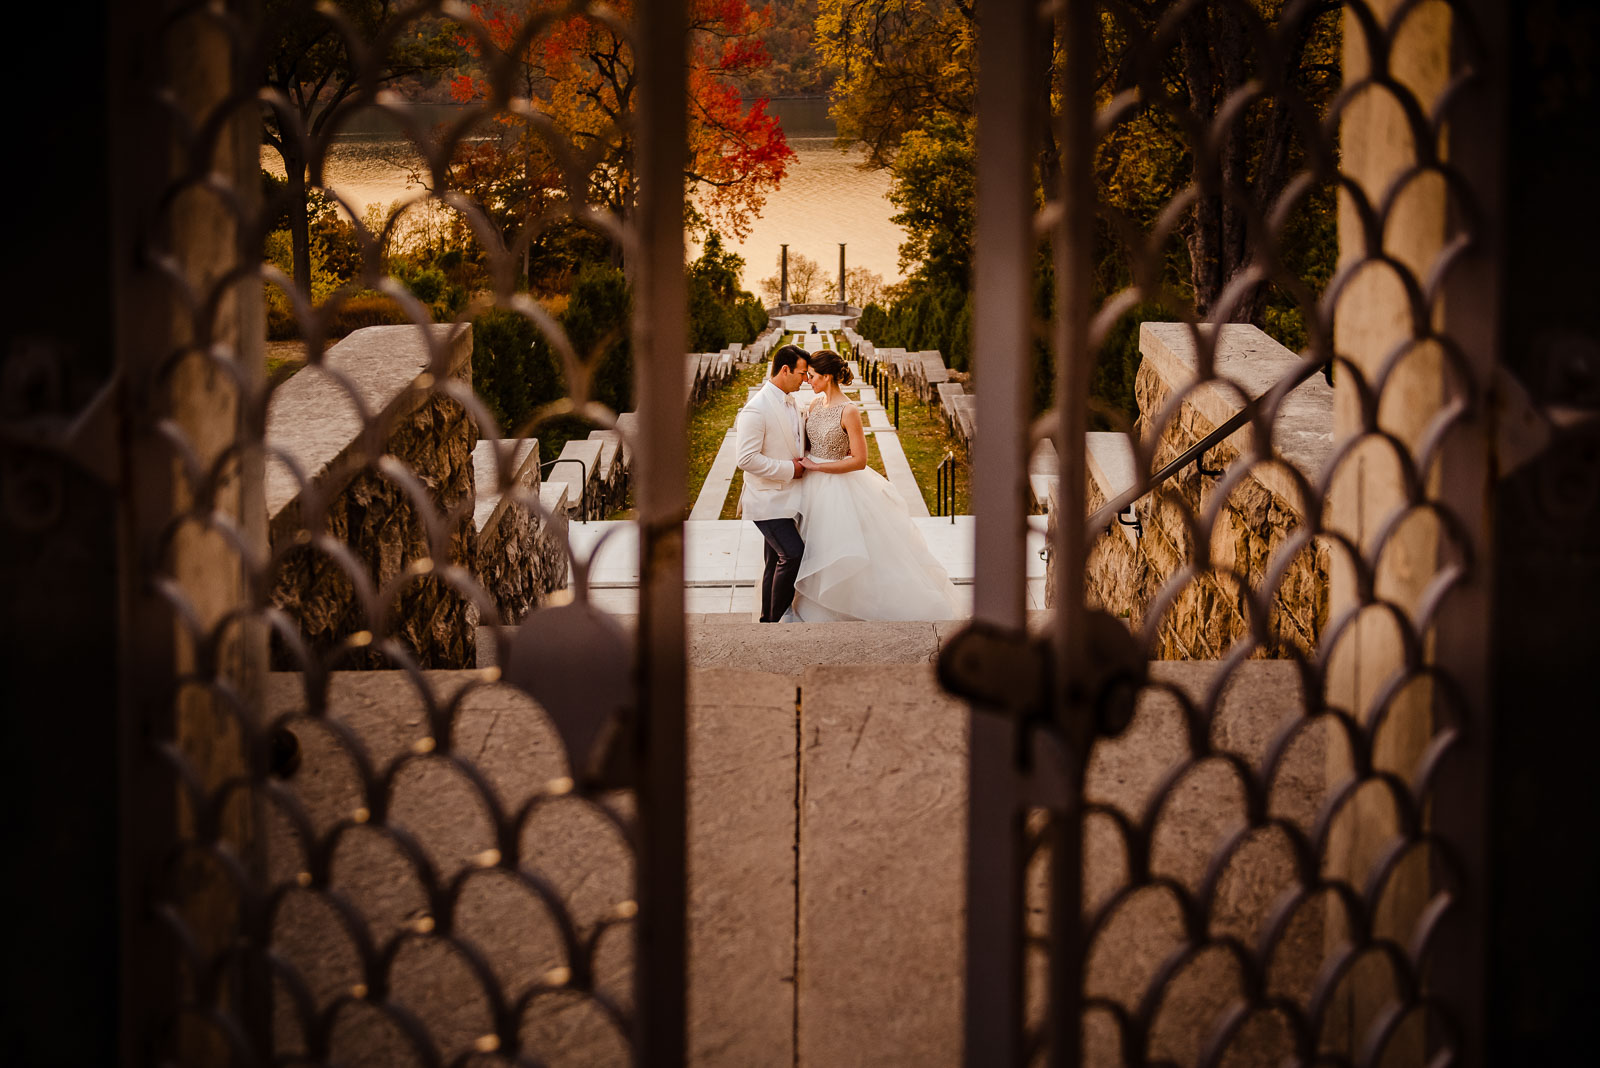 Bride and groom portrait in park